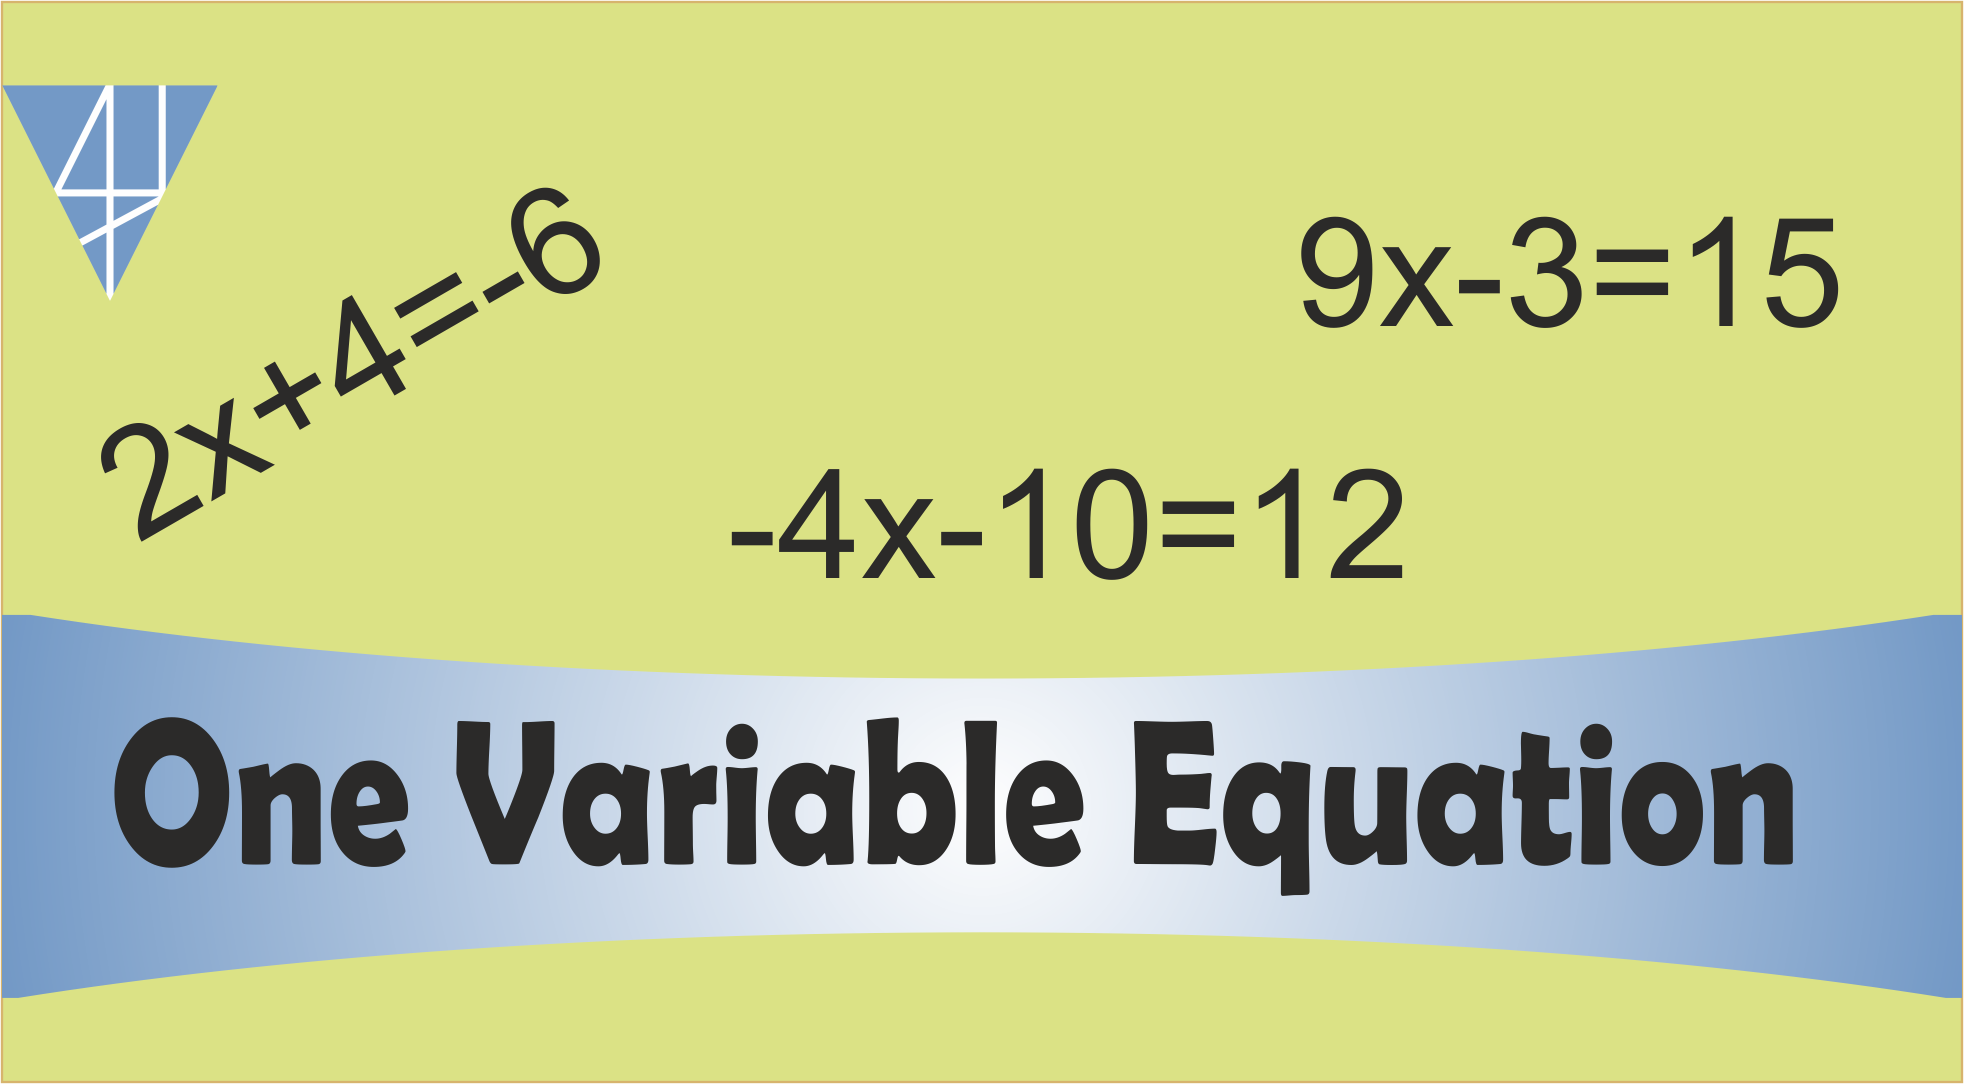 BMS9-One Variable Equation